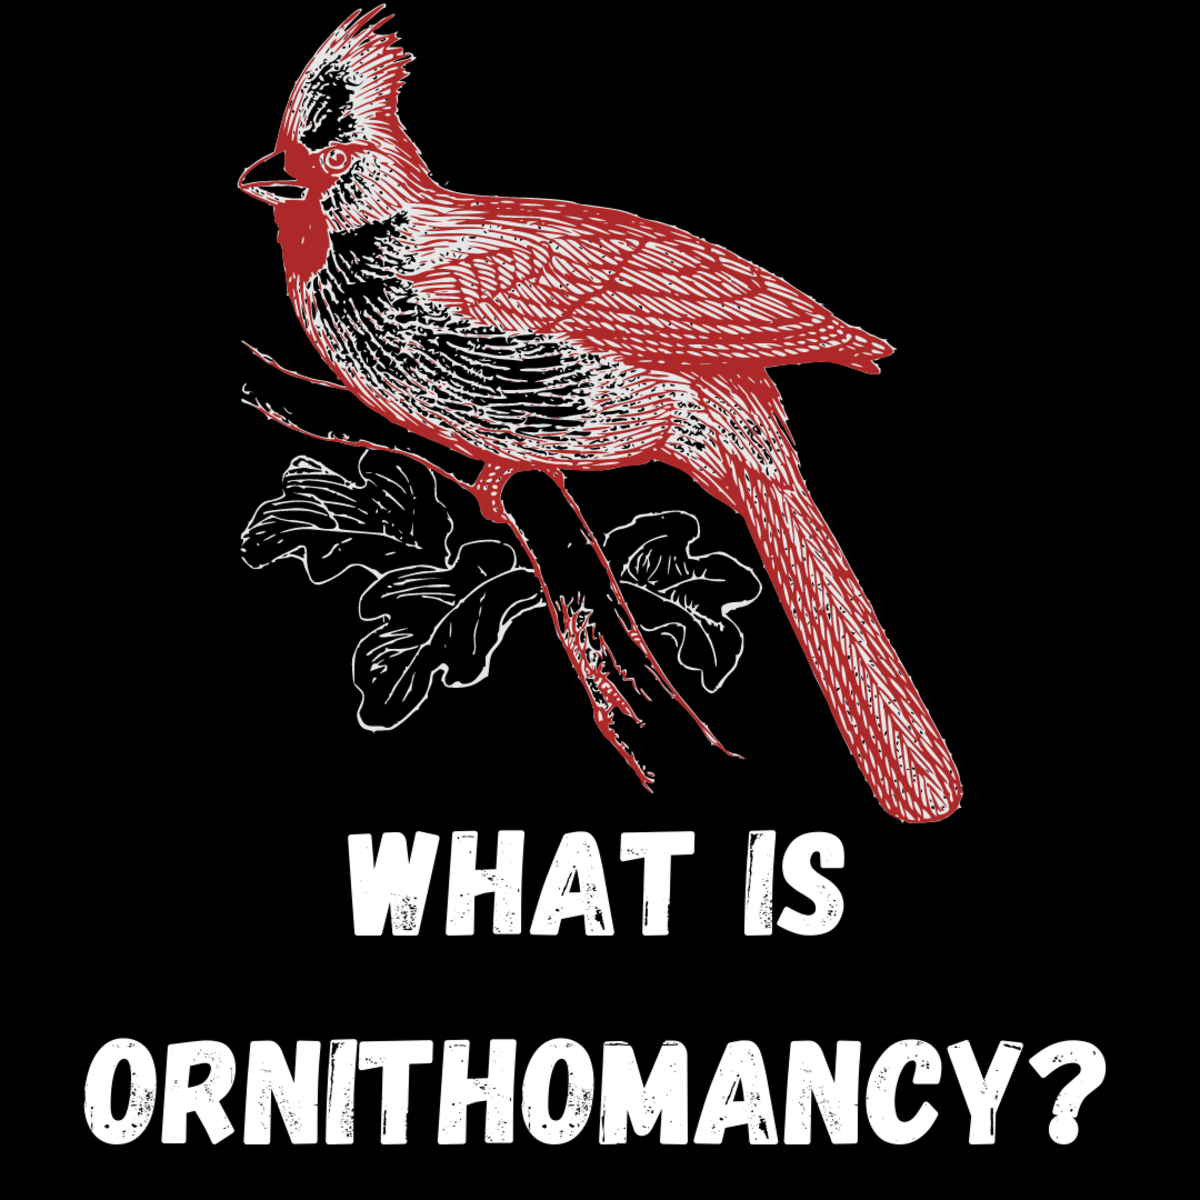 Ornithomancy: Divination From the Flight and Cries of Birds